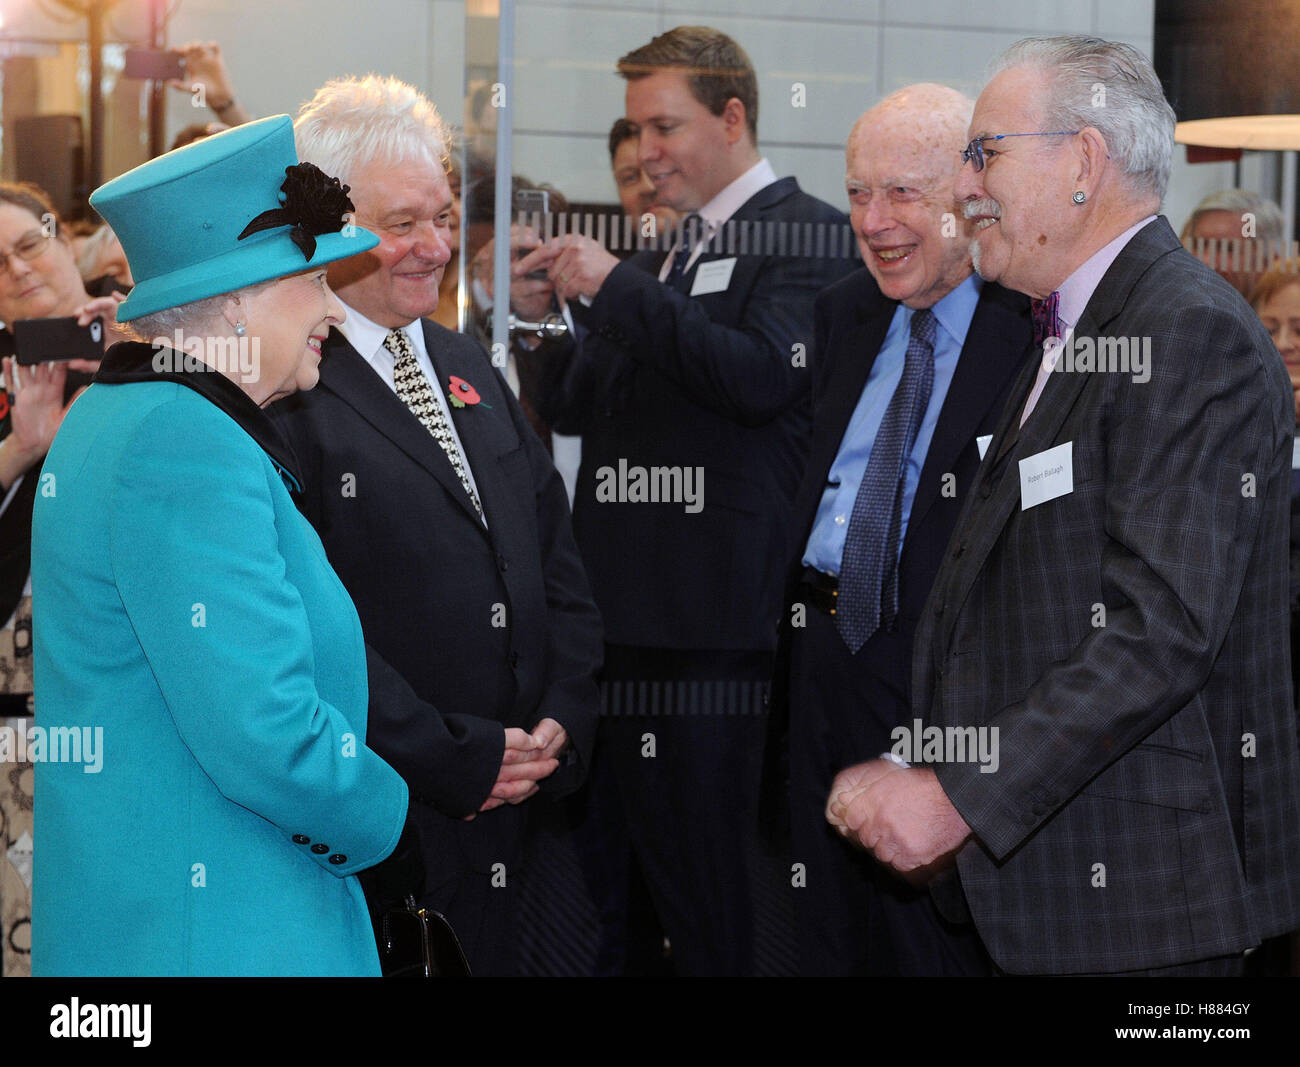 Queen Elizabeth II with Sir Paul Nurse (left) James Watson (second right), who discovered the structure of DNA and artist Robert Ballagh, during a visit to officially open the Francis Crick Institute in central London. Stock Photo